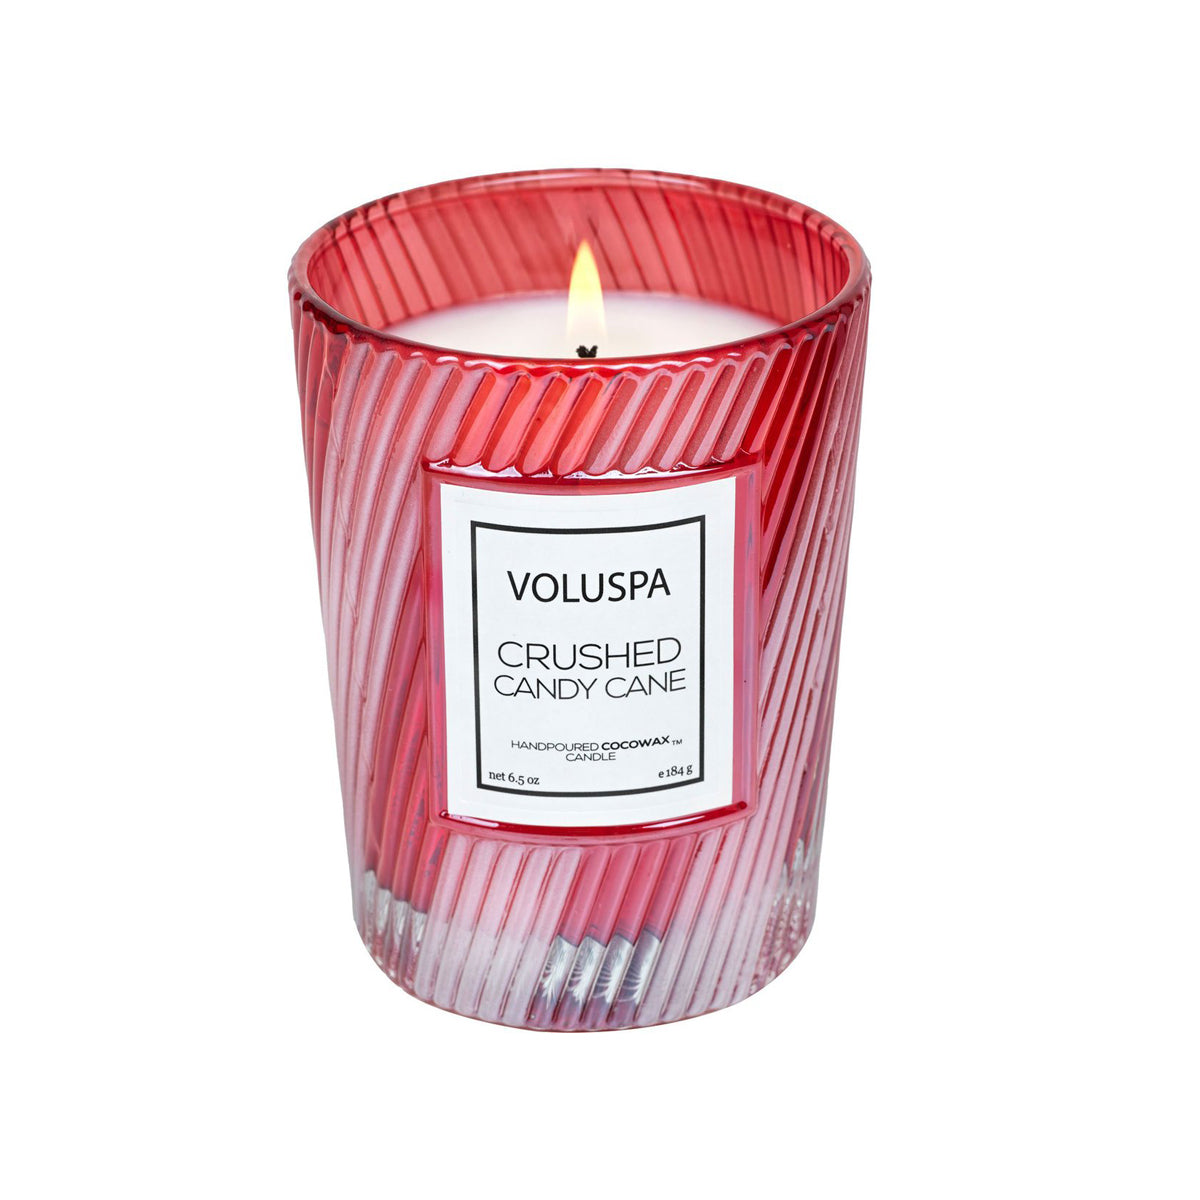 CRUSHED CANDY CANE CANDLE - CLASSIC - 6.5 OZ